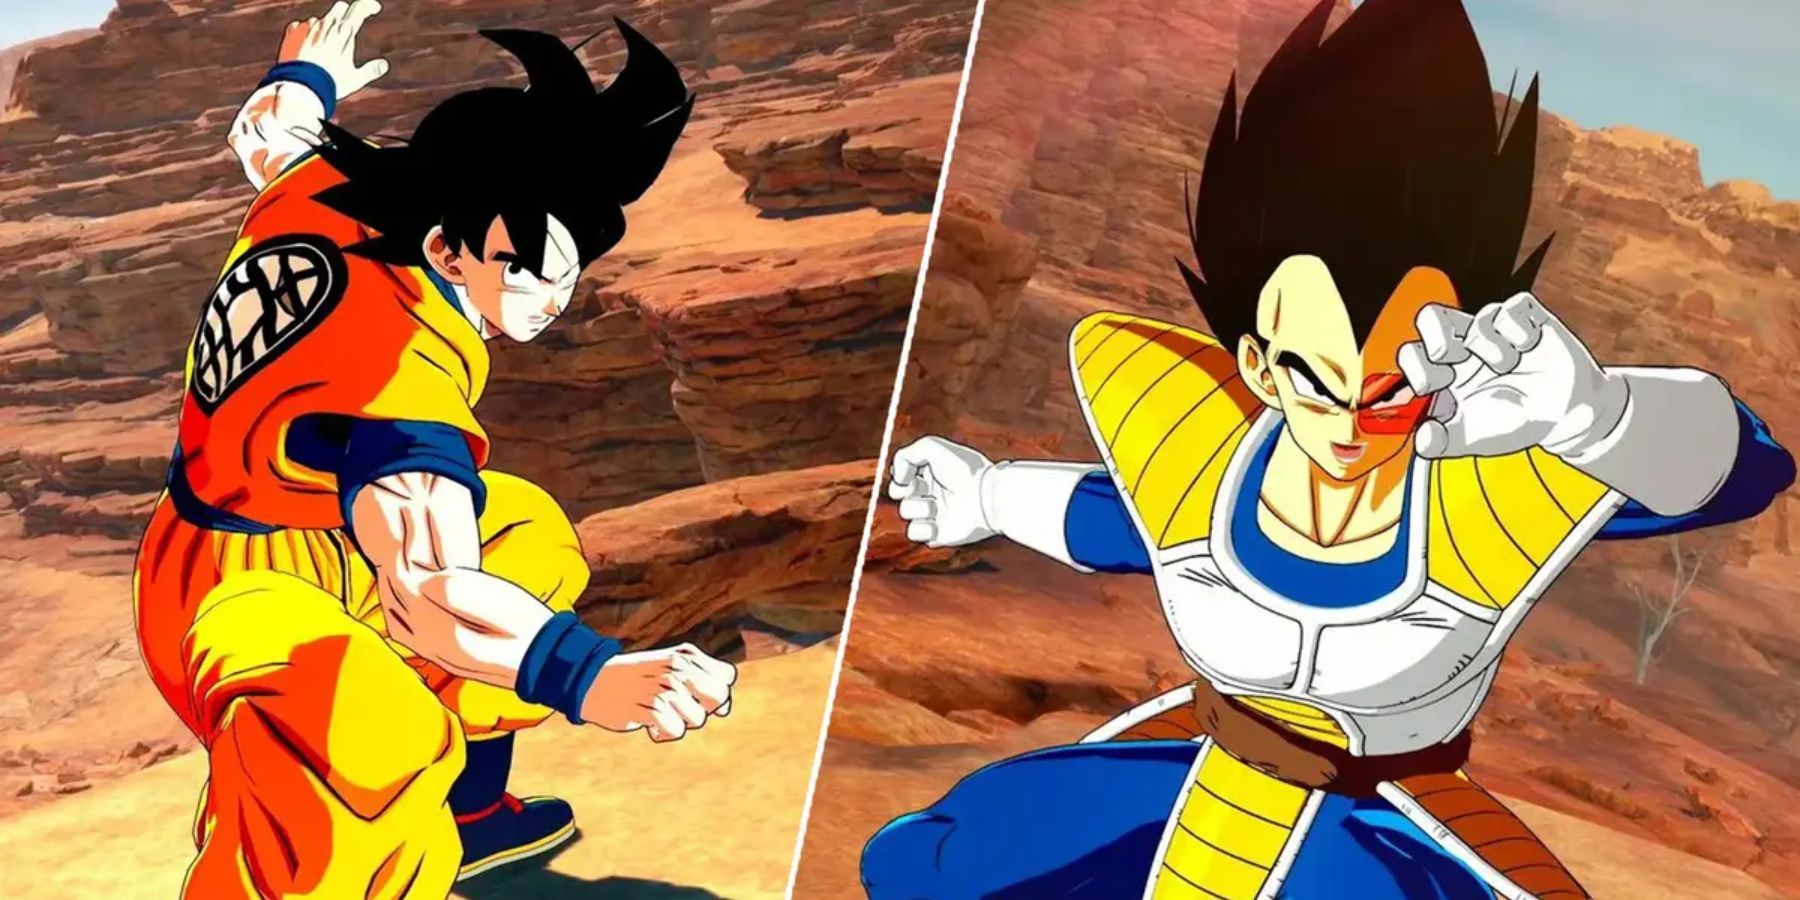 Every Playable Dragon Ball: Sparking Zero Character Confirmed So Far